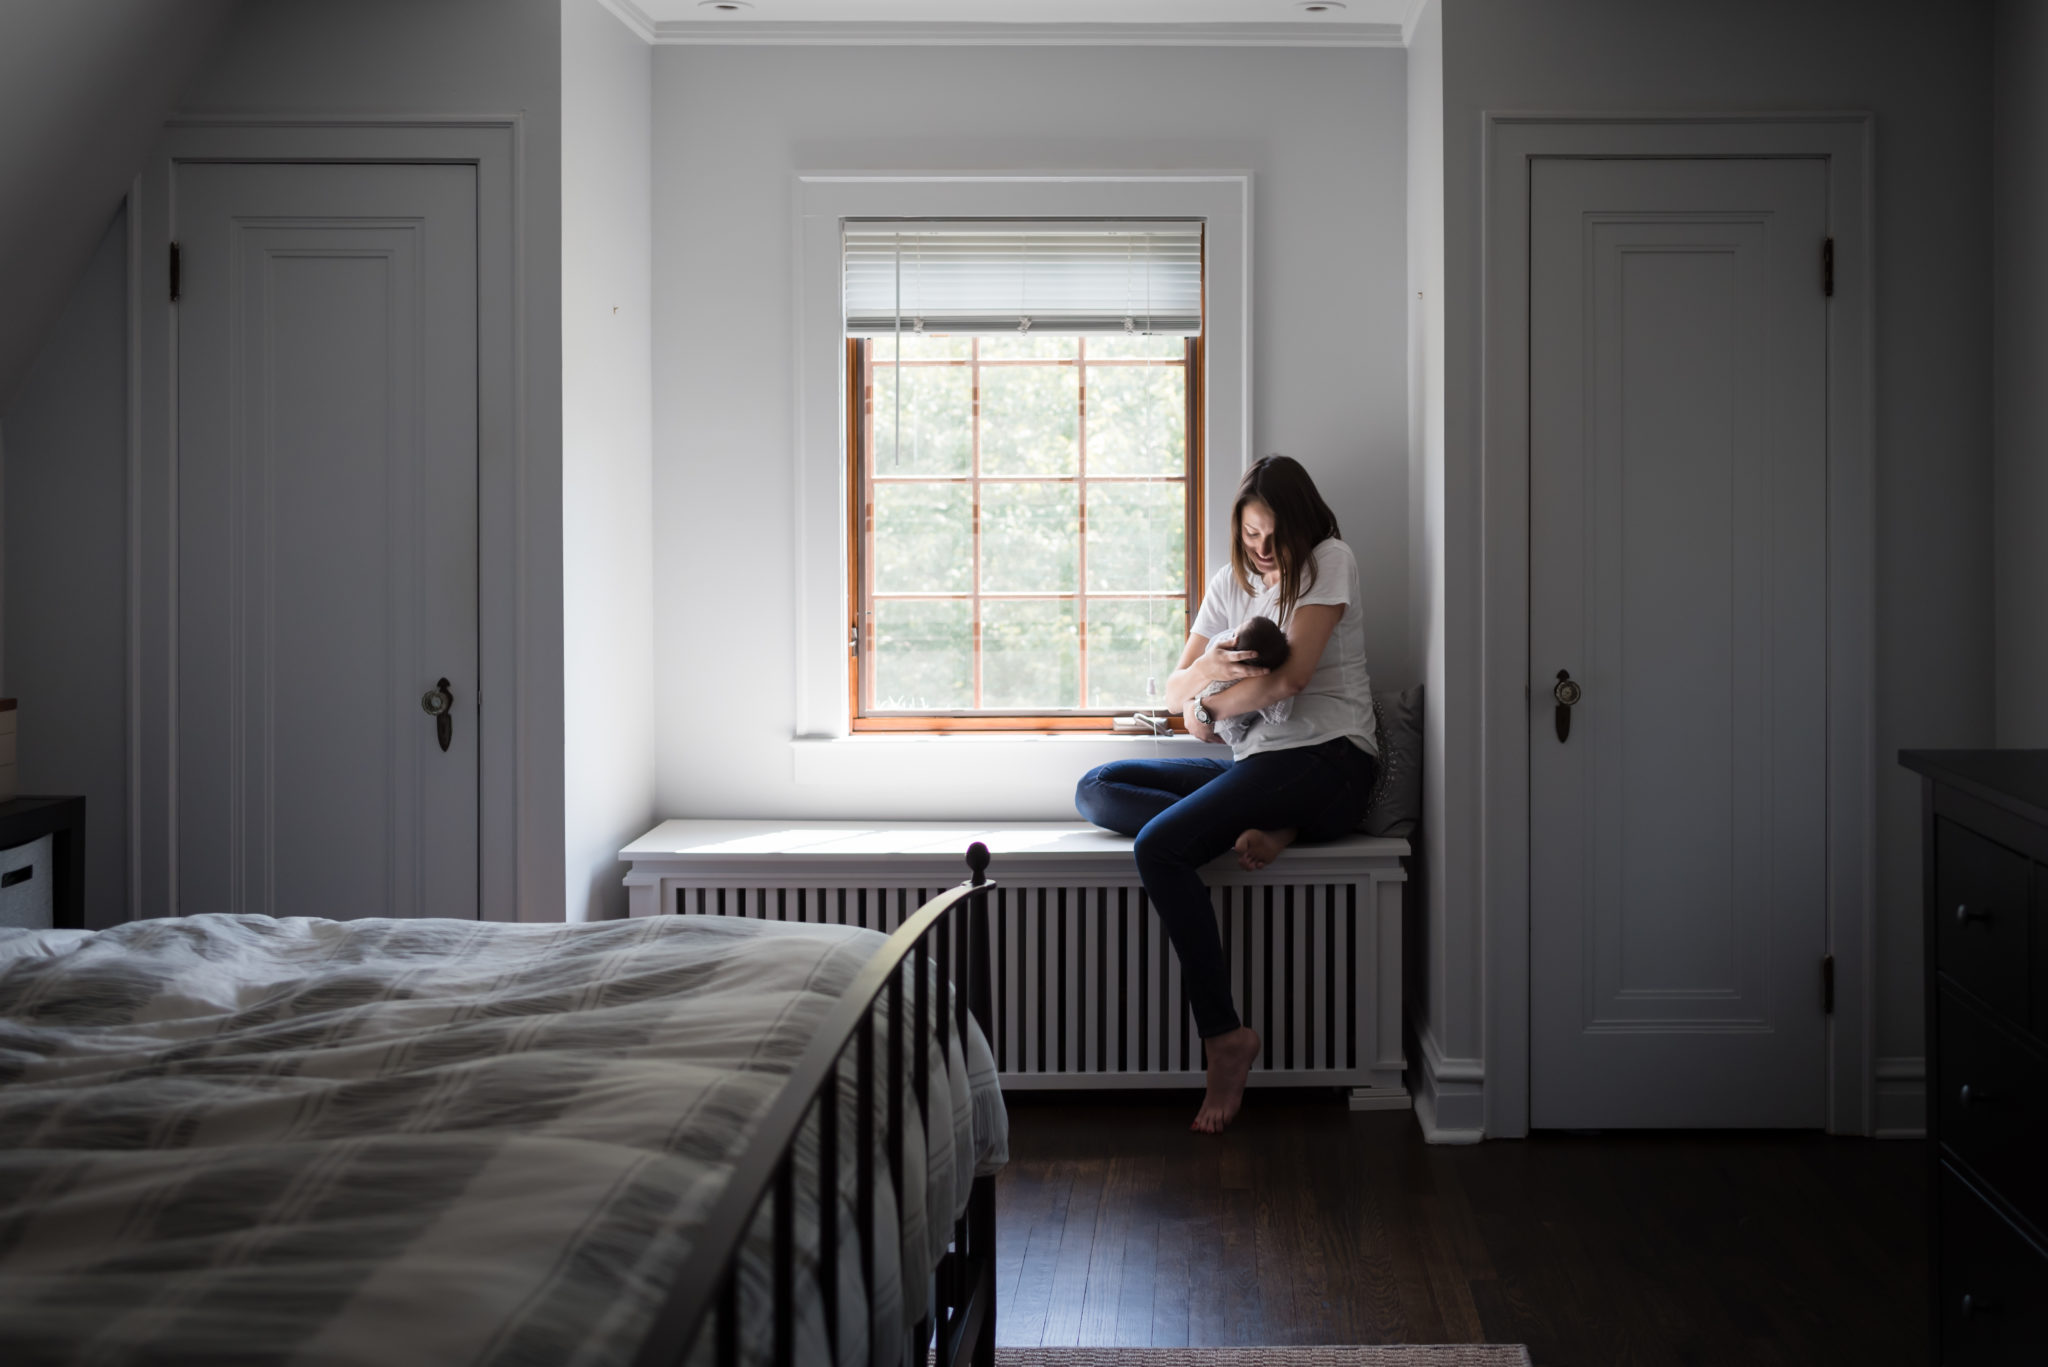 Newborn Lifestyle Photograph mom by window with baby